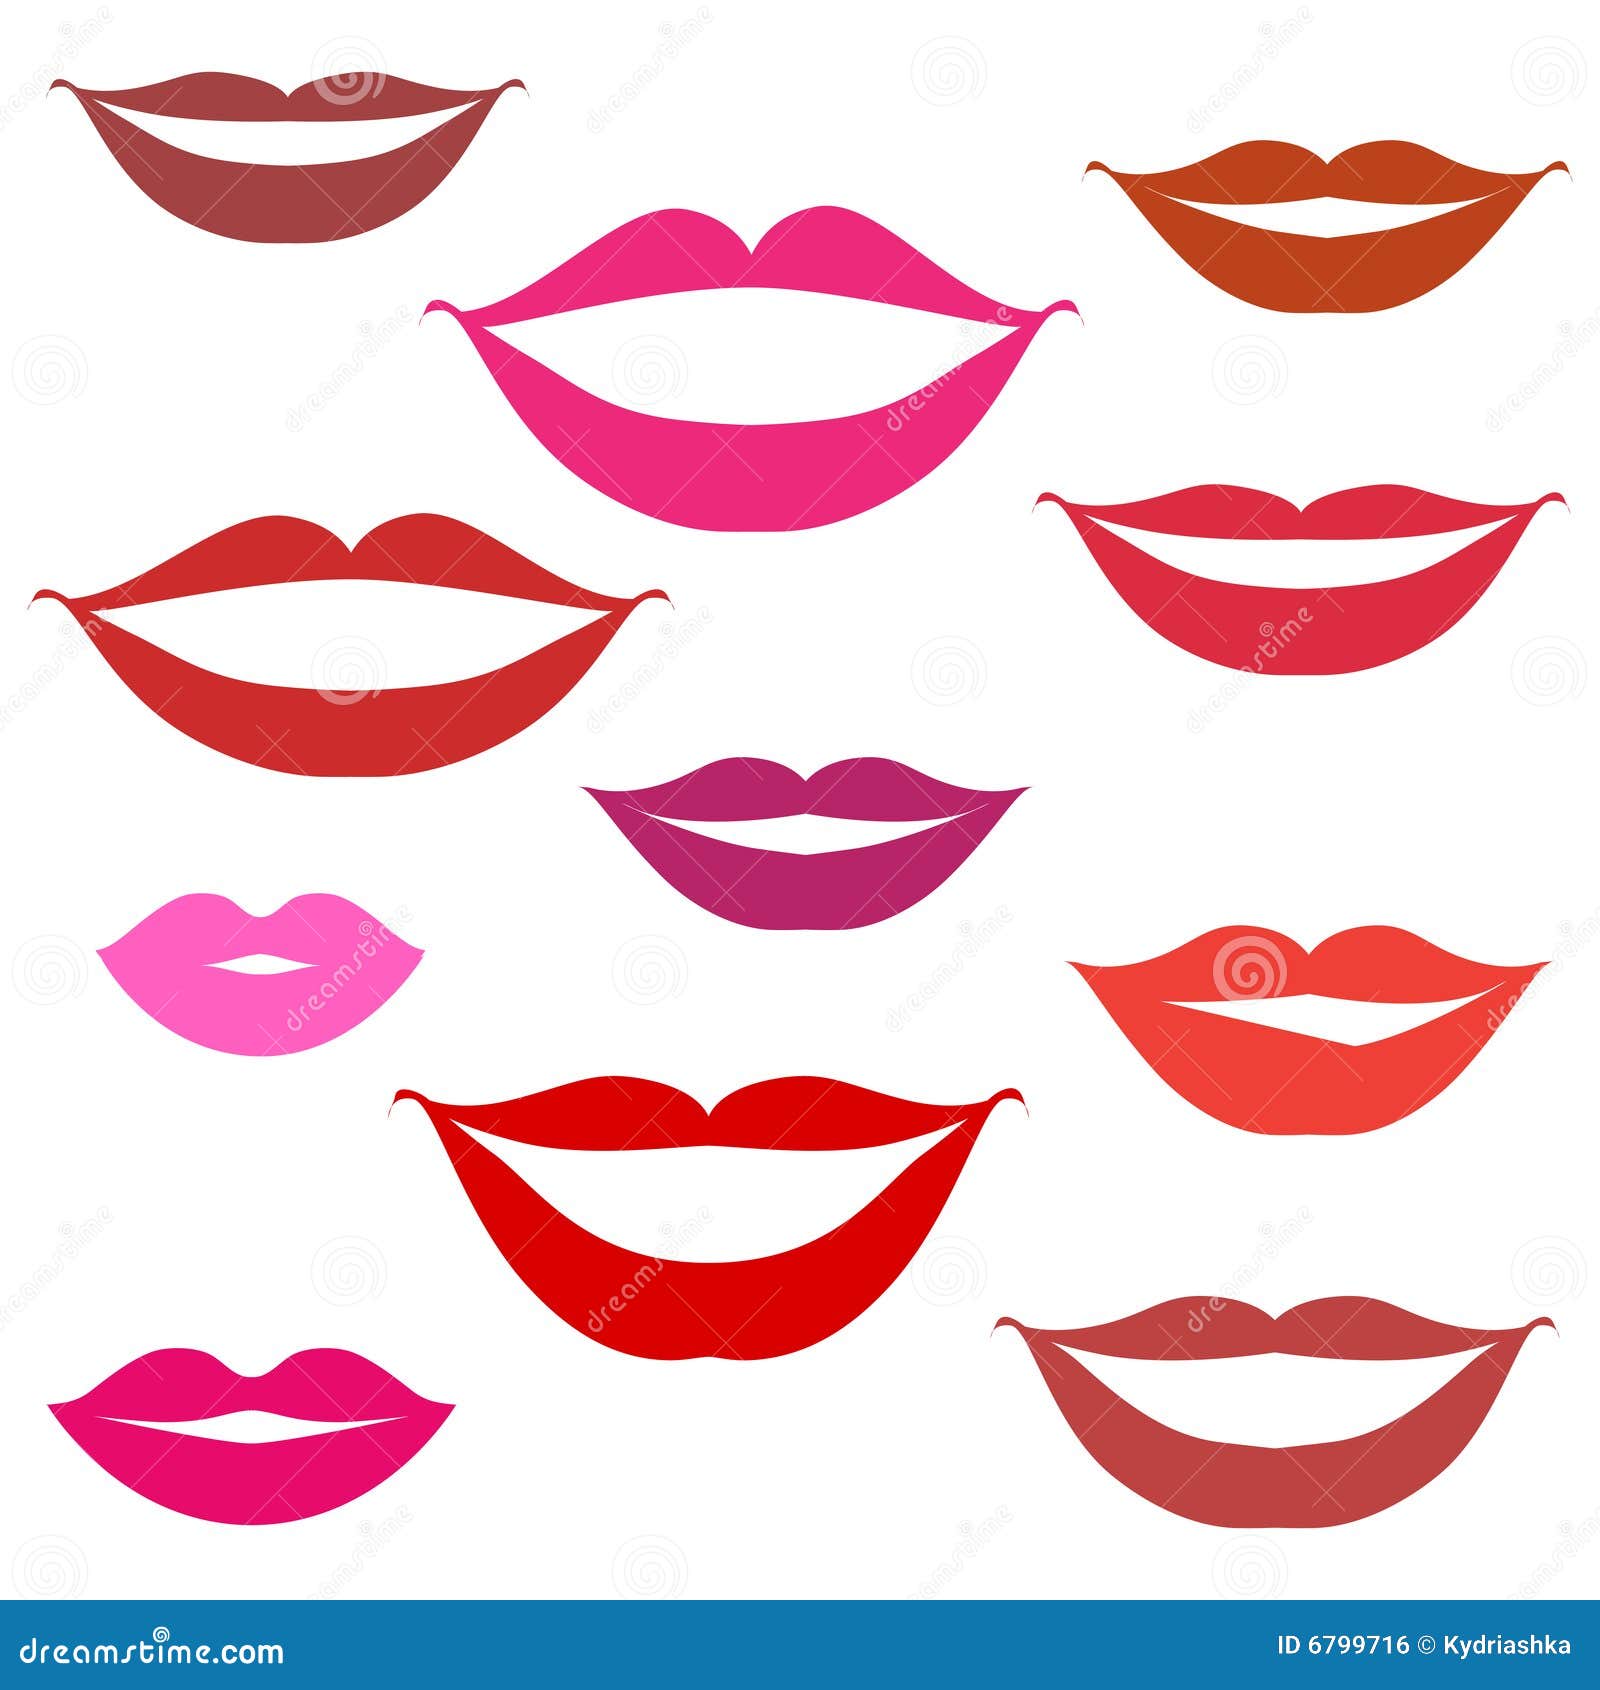 free clipart smiling lips - photo #43